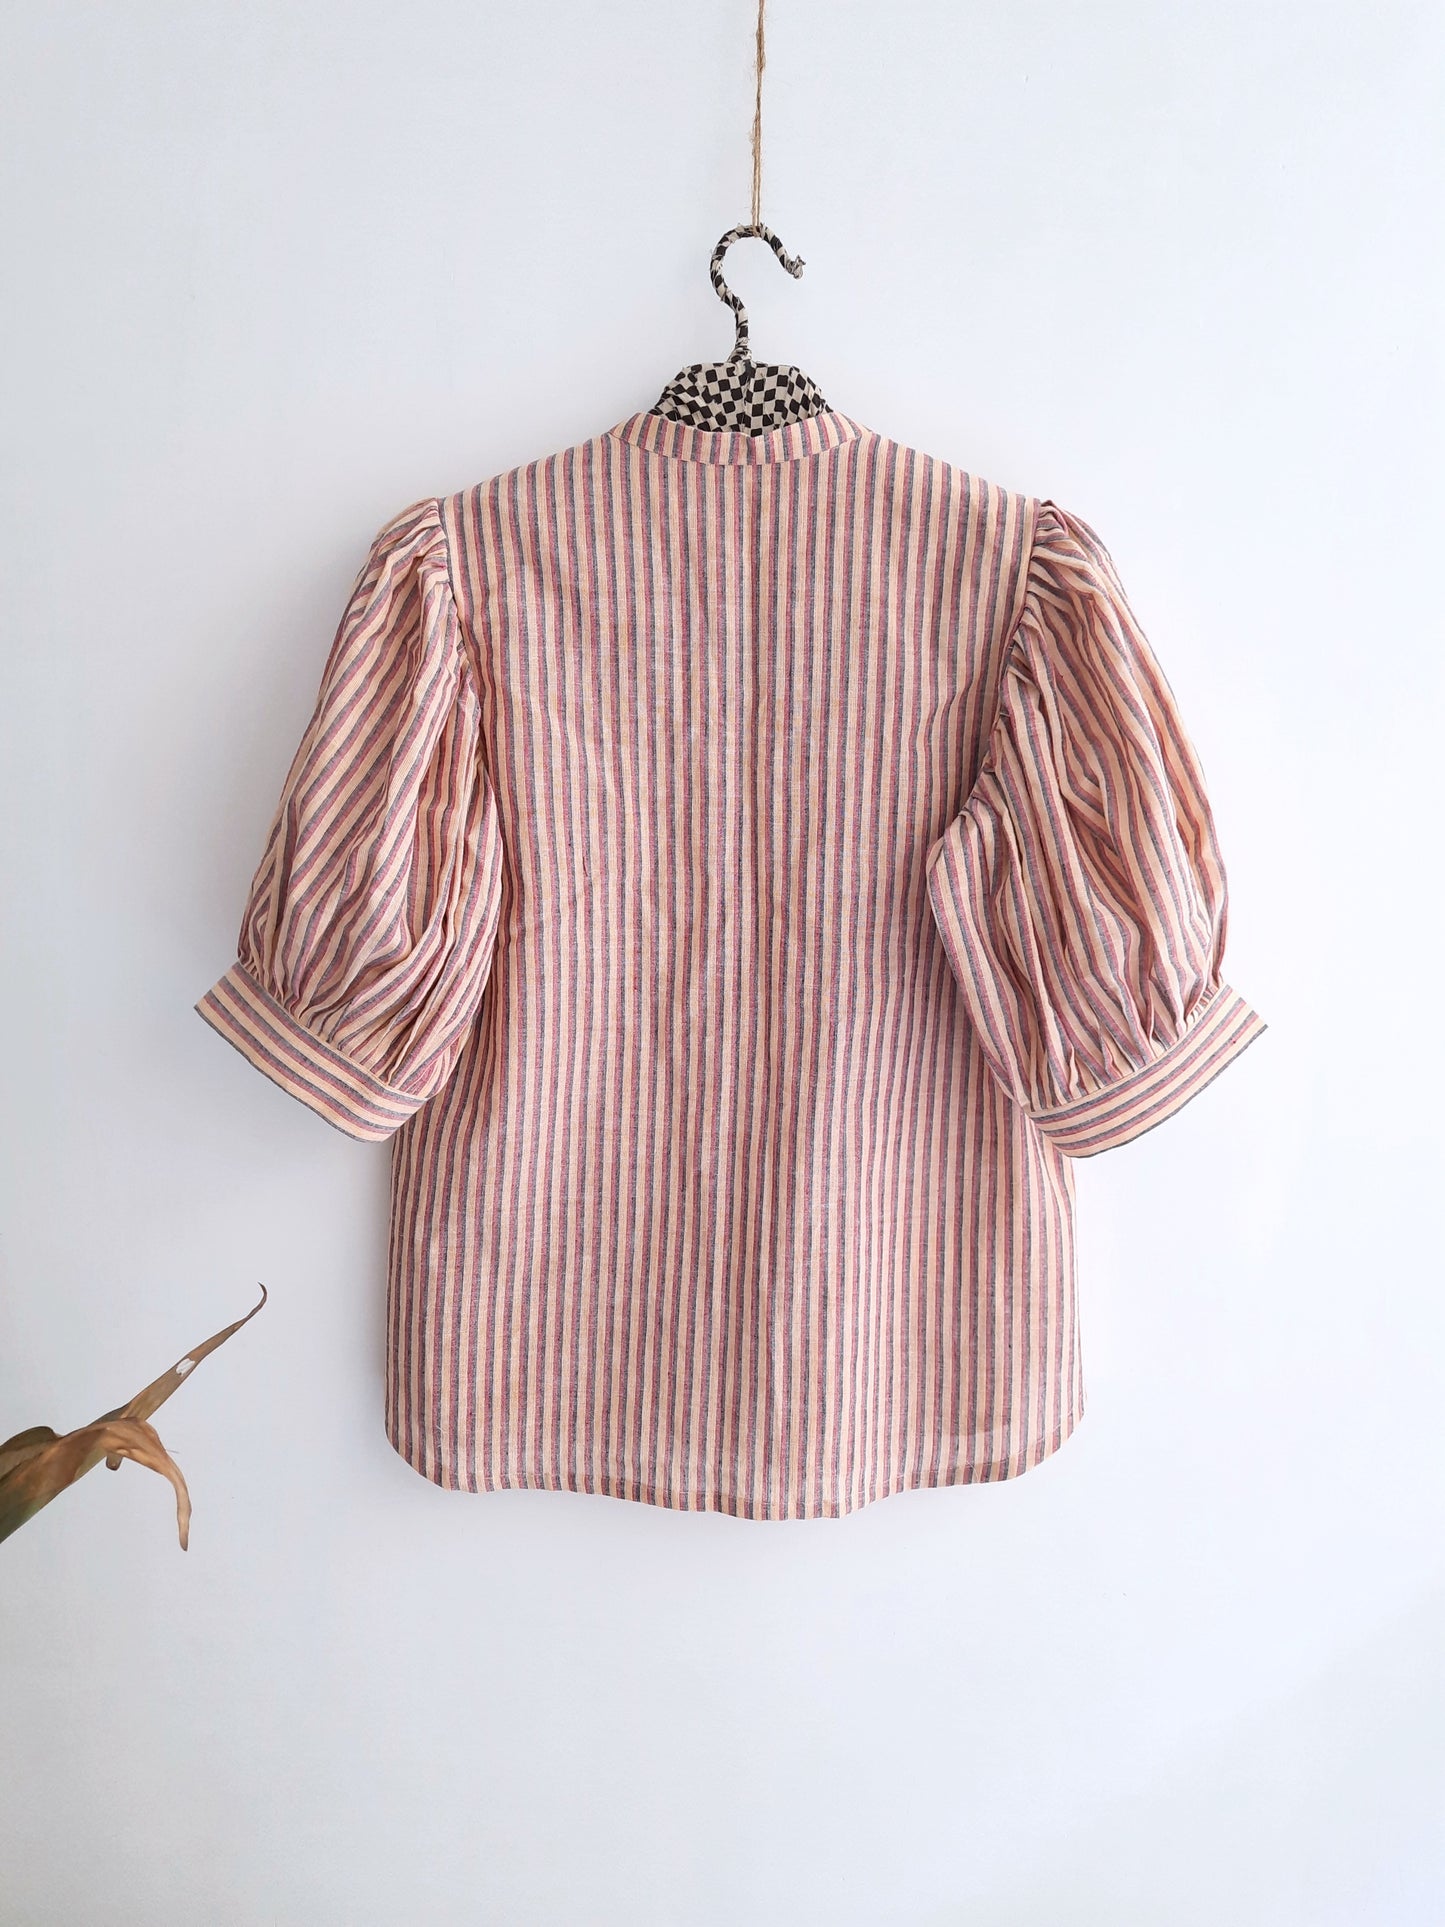 Striped hand-spun cotton shirt with mandarin collar and puffy sleeves for women.